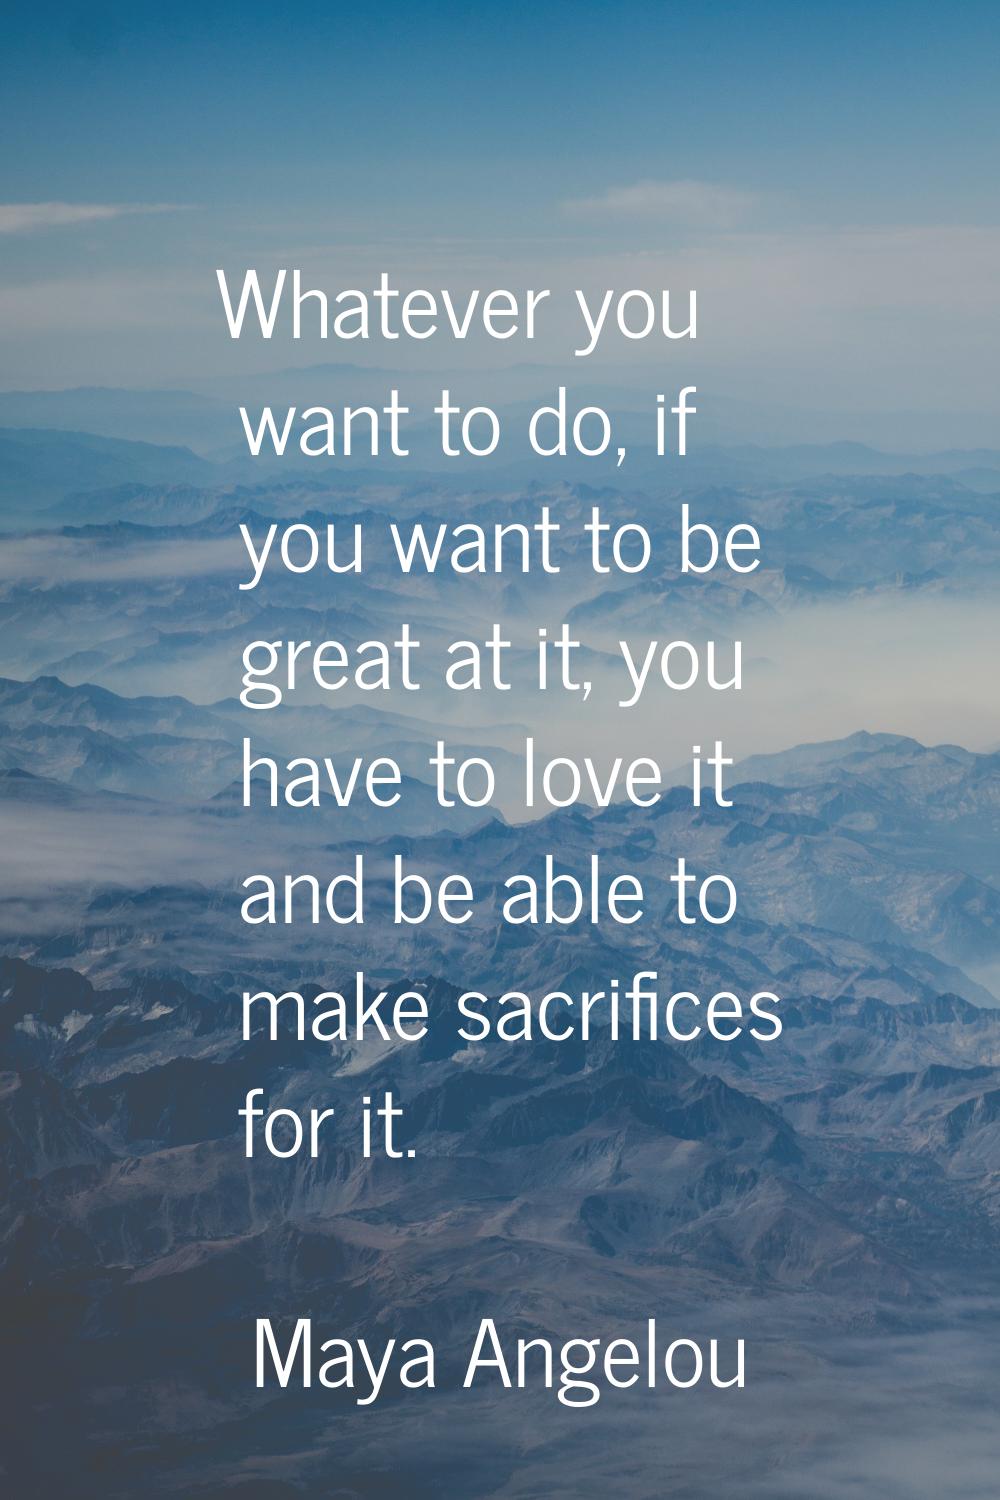 Whatever you want to do, if you want to be great at it, you have to love it and be able to make sac